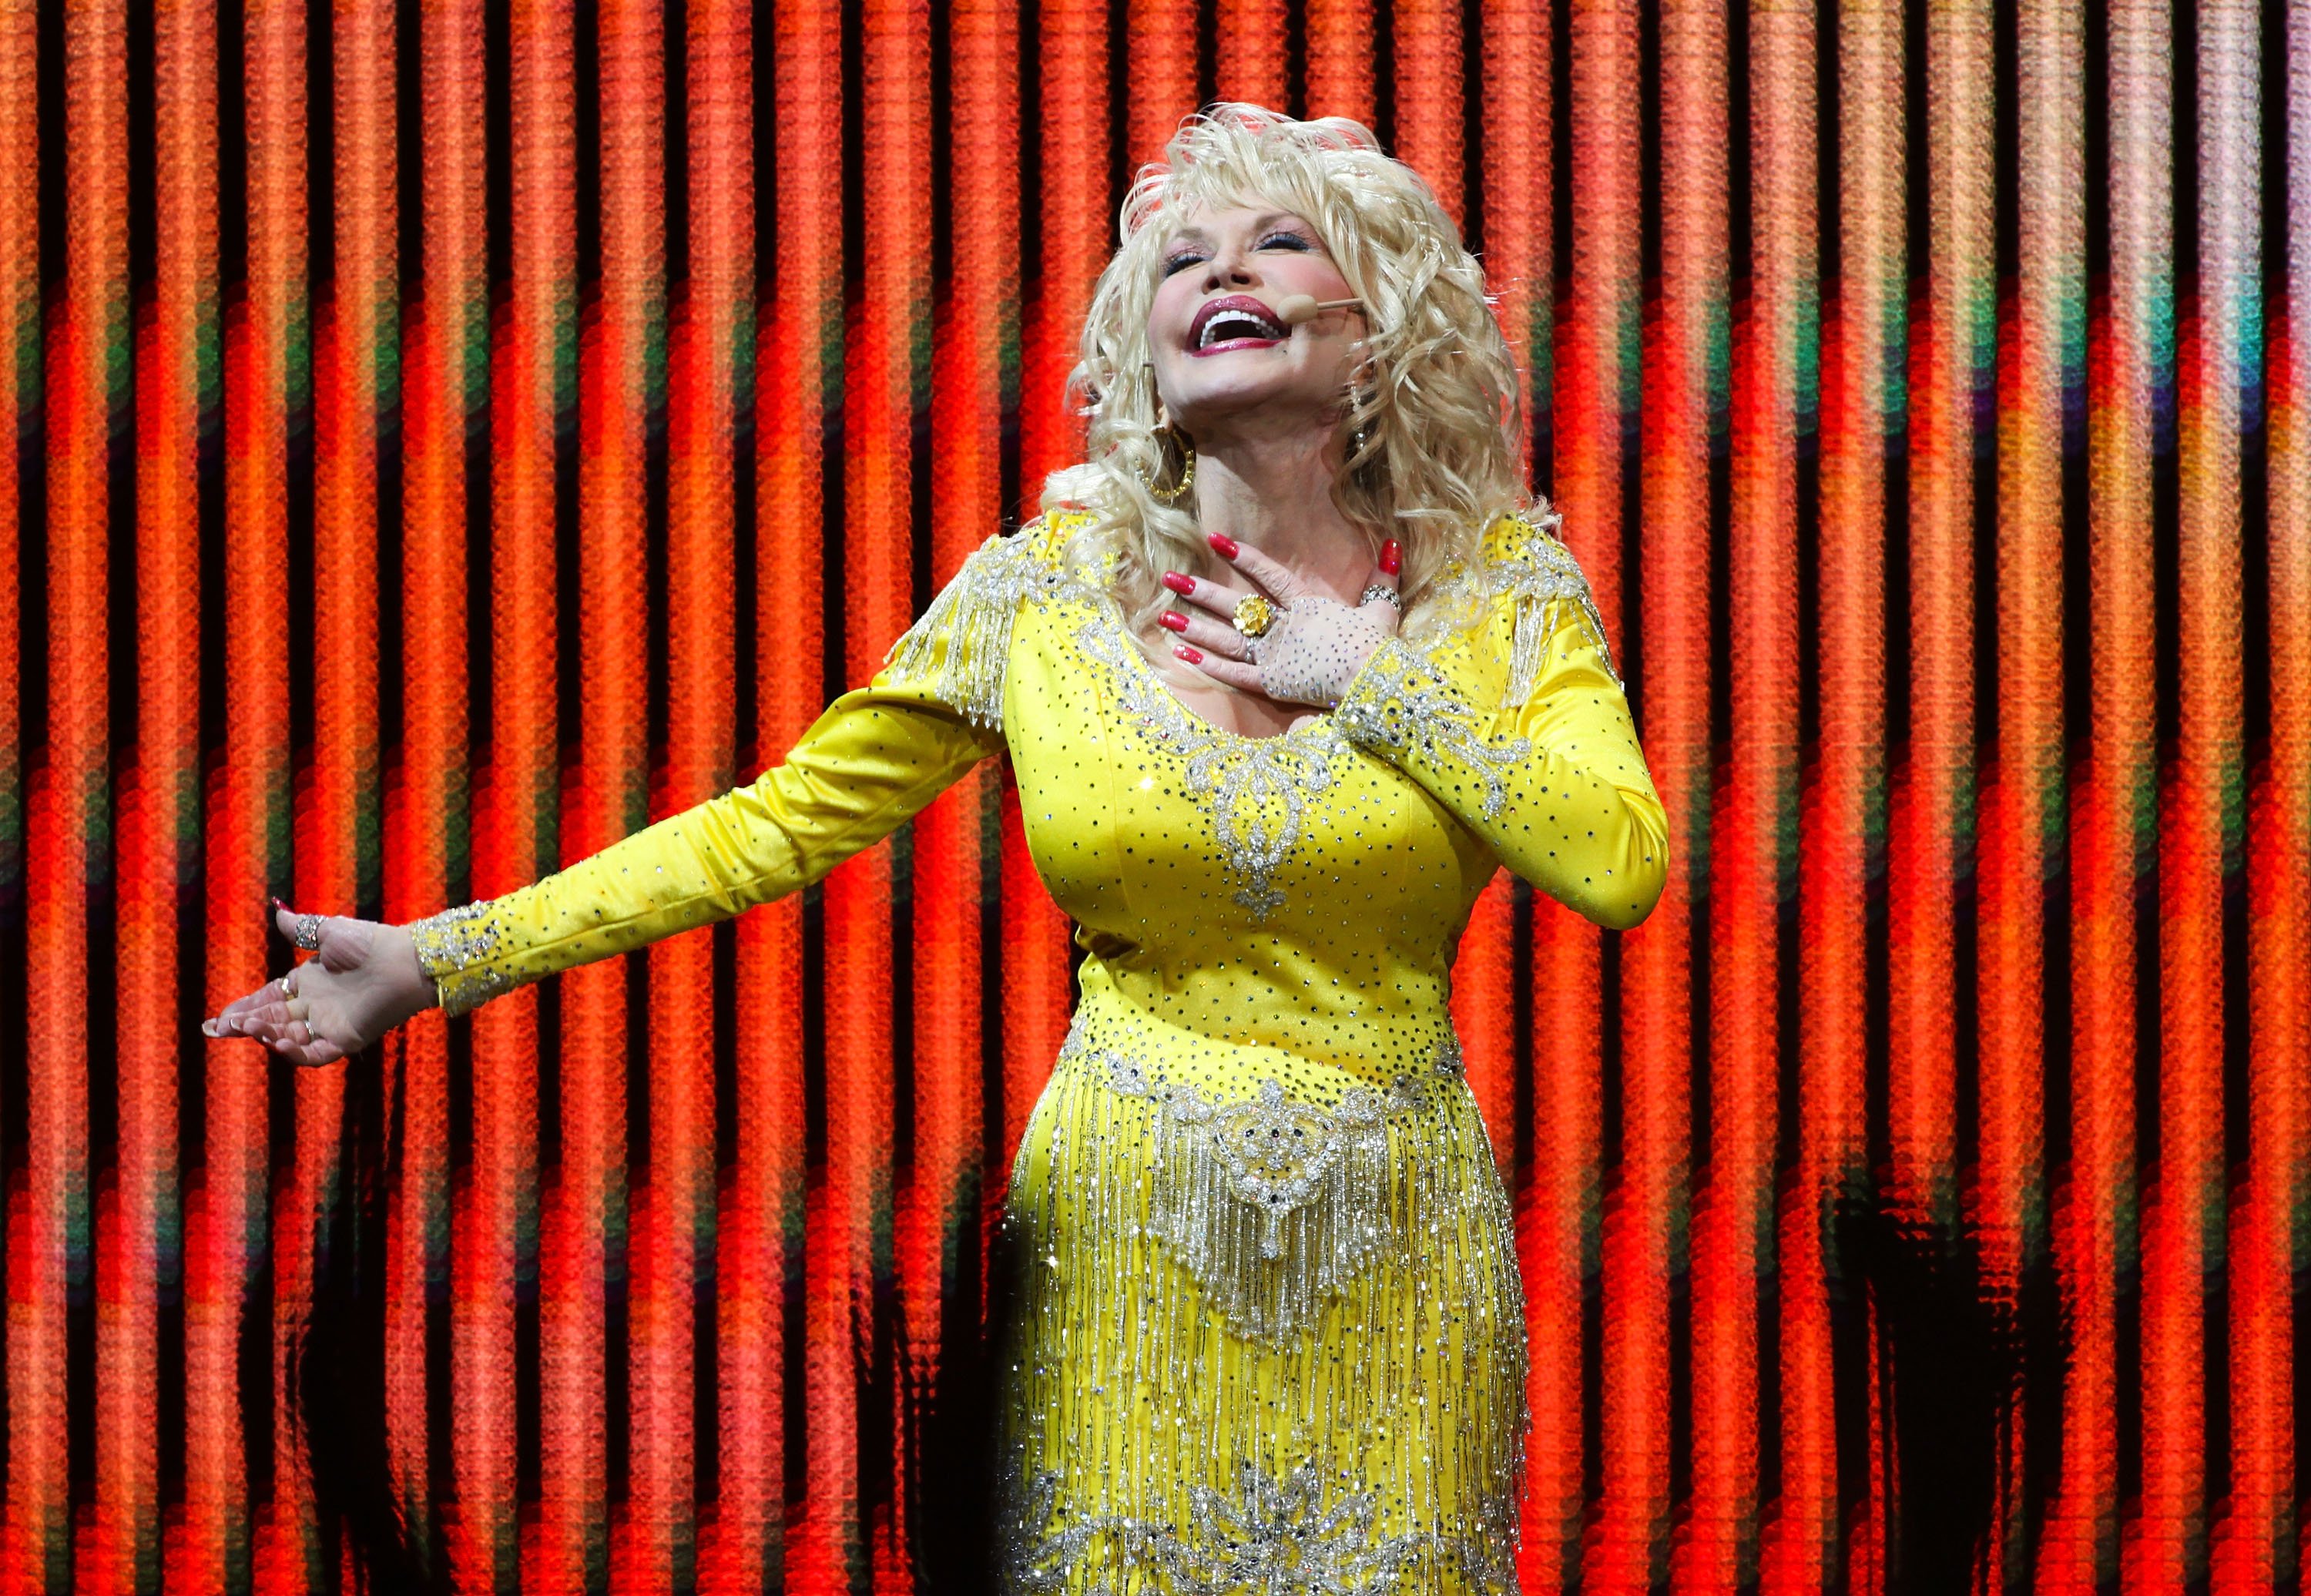 Dolly Parton in a yellow dress